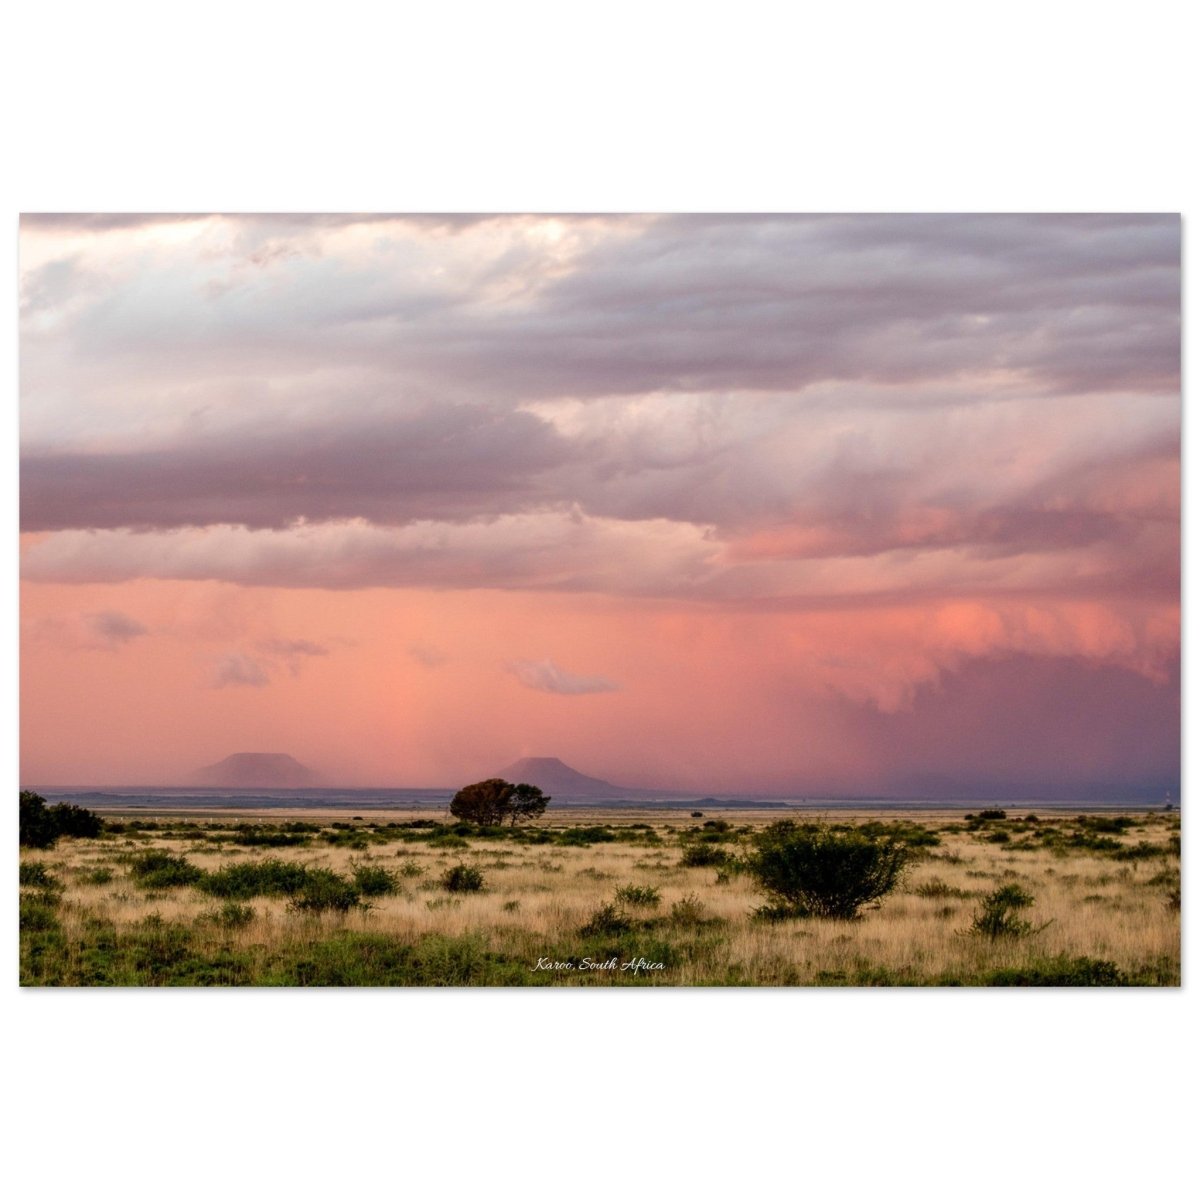 20x30 cm / 8x12″ African Sunset of the Karoo by Picture This